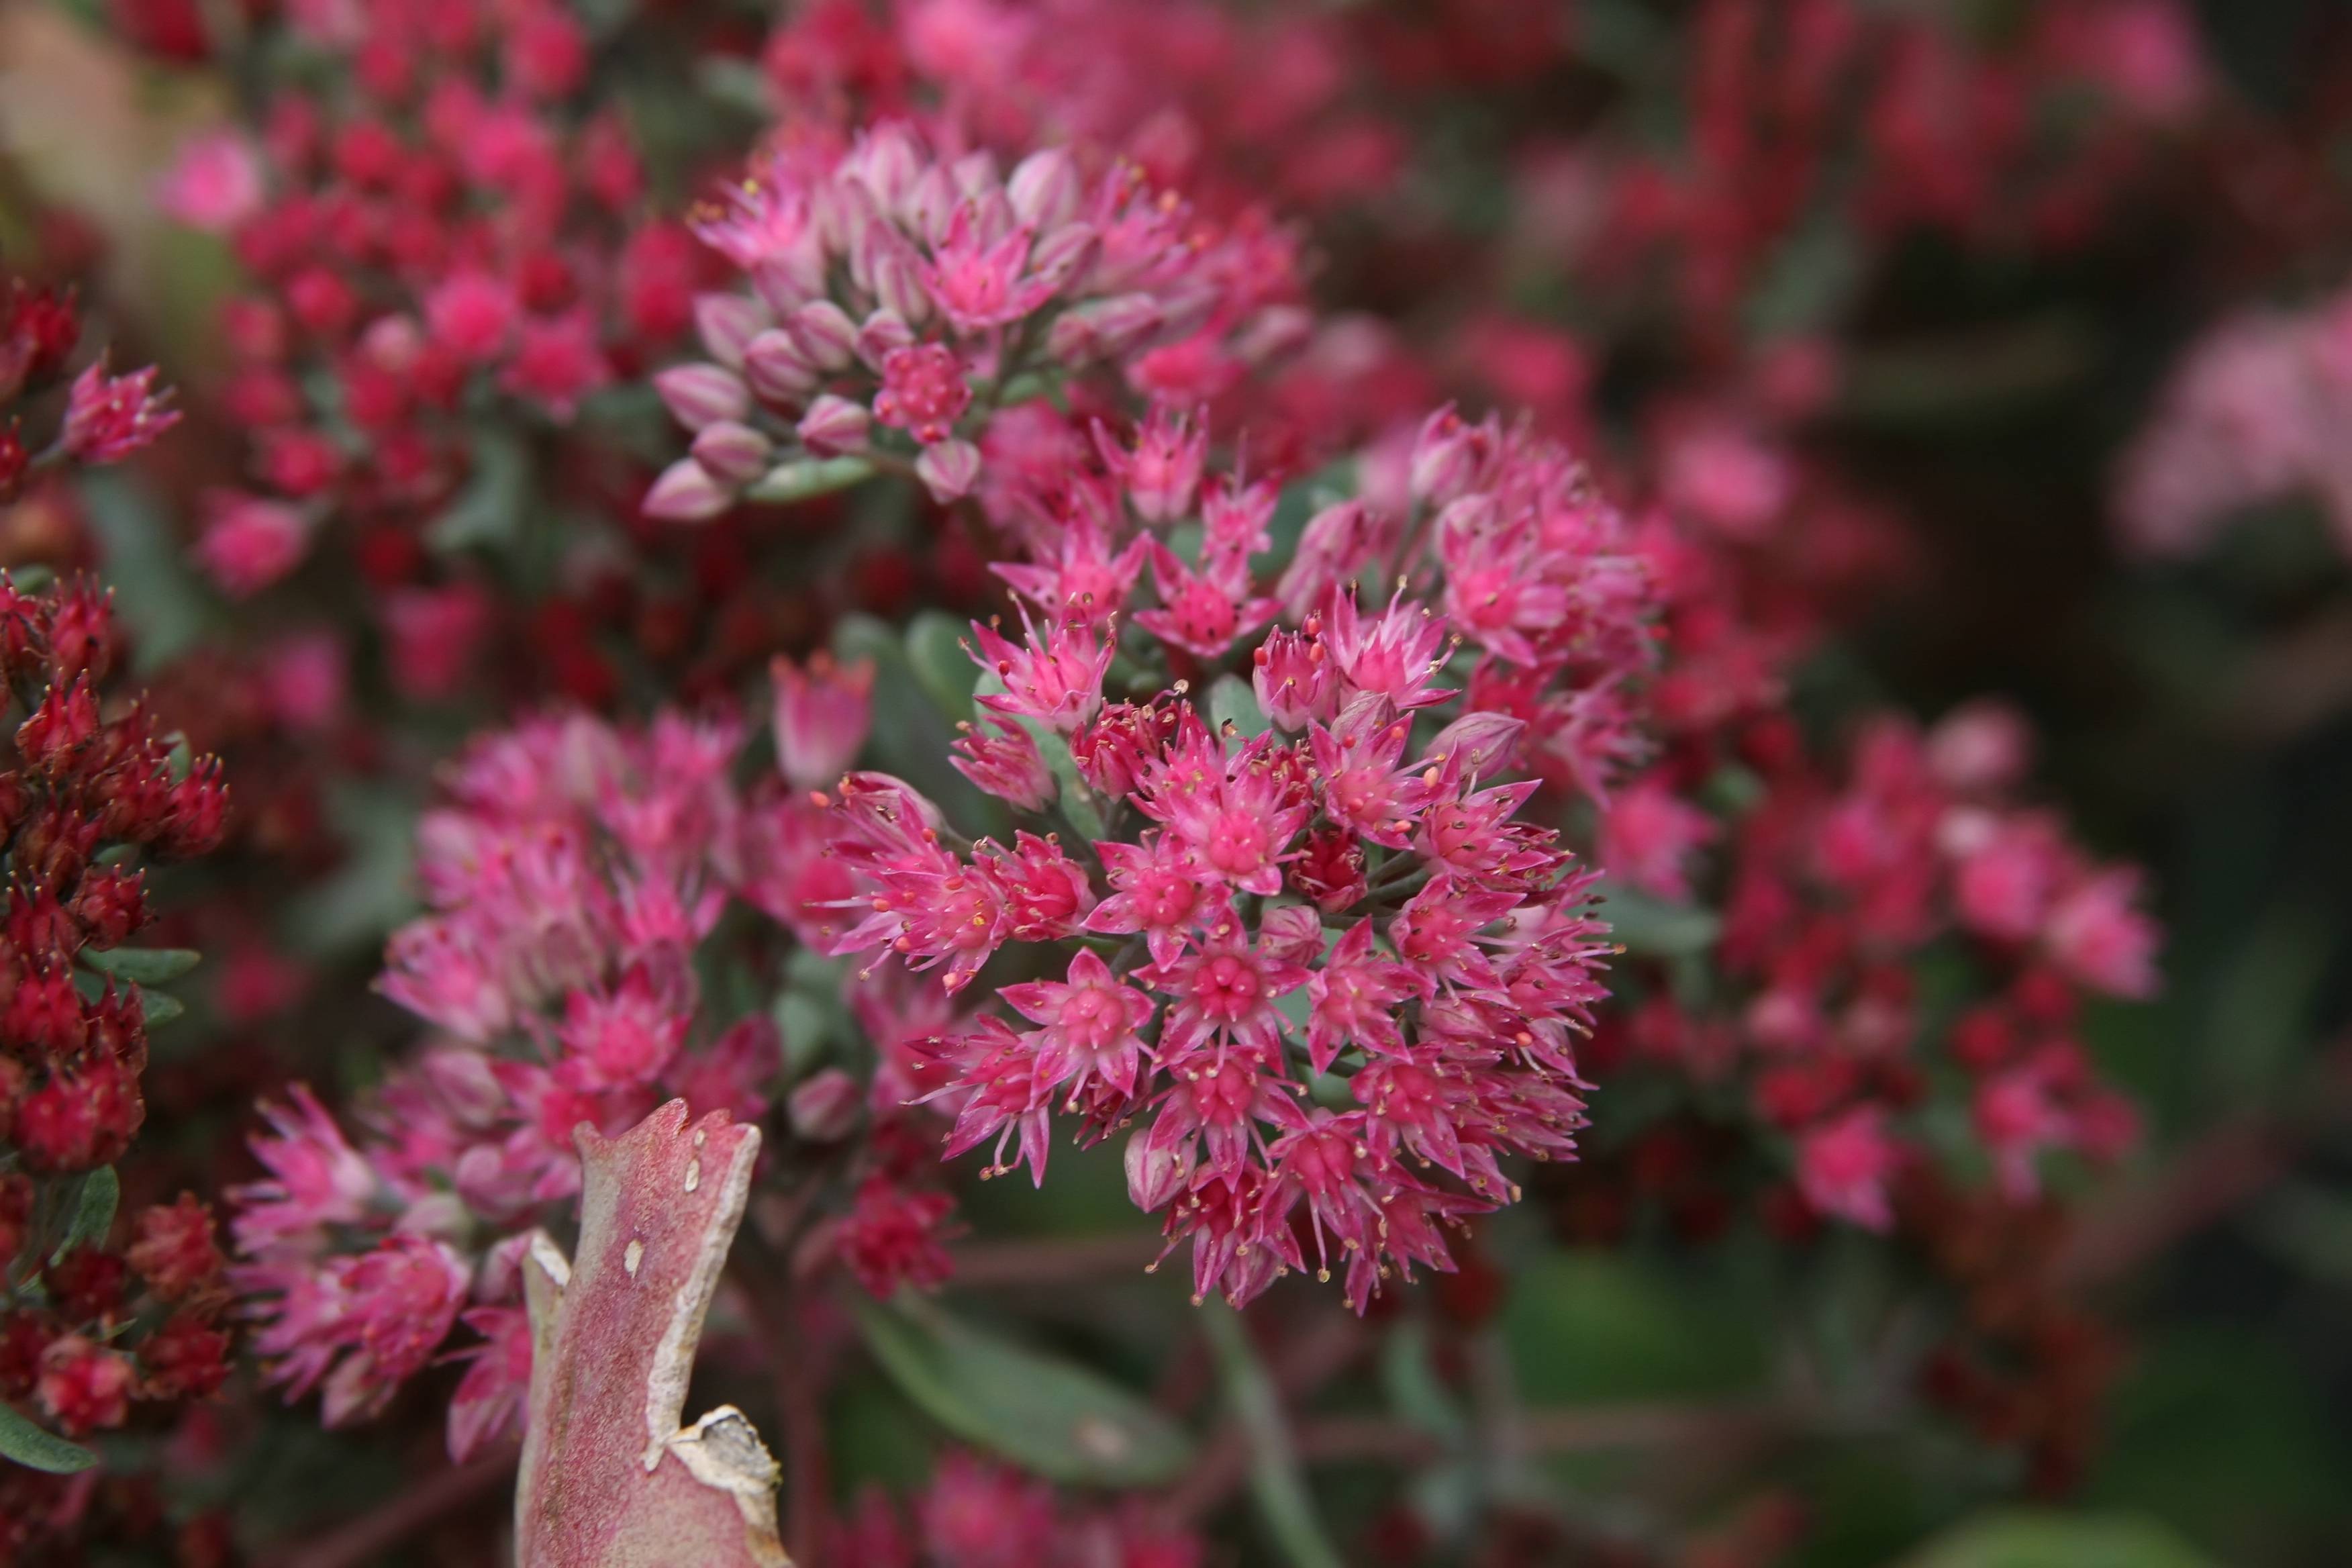 dark-pink flowers and pink buds with green leaves and stems